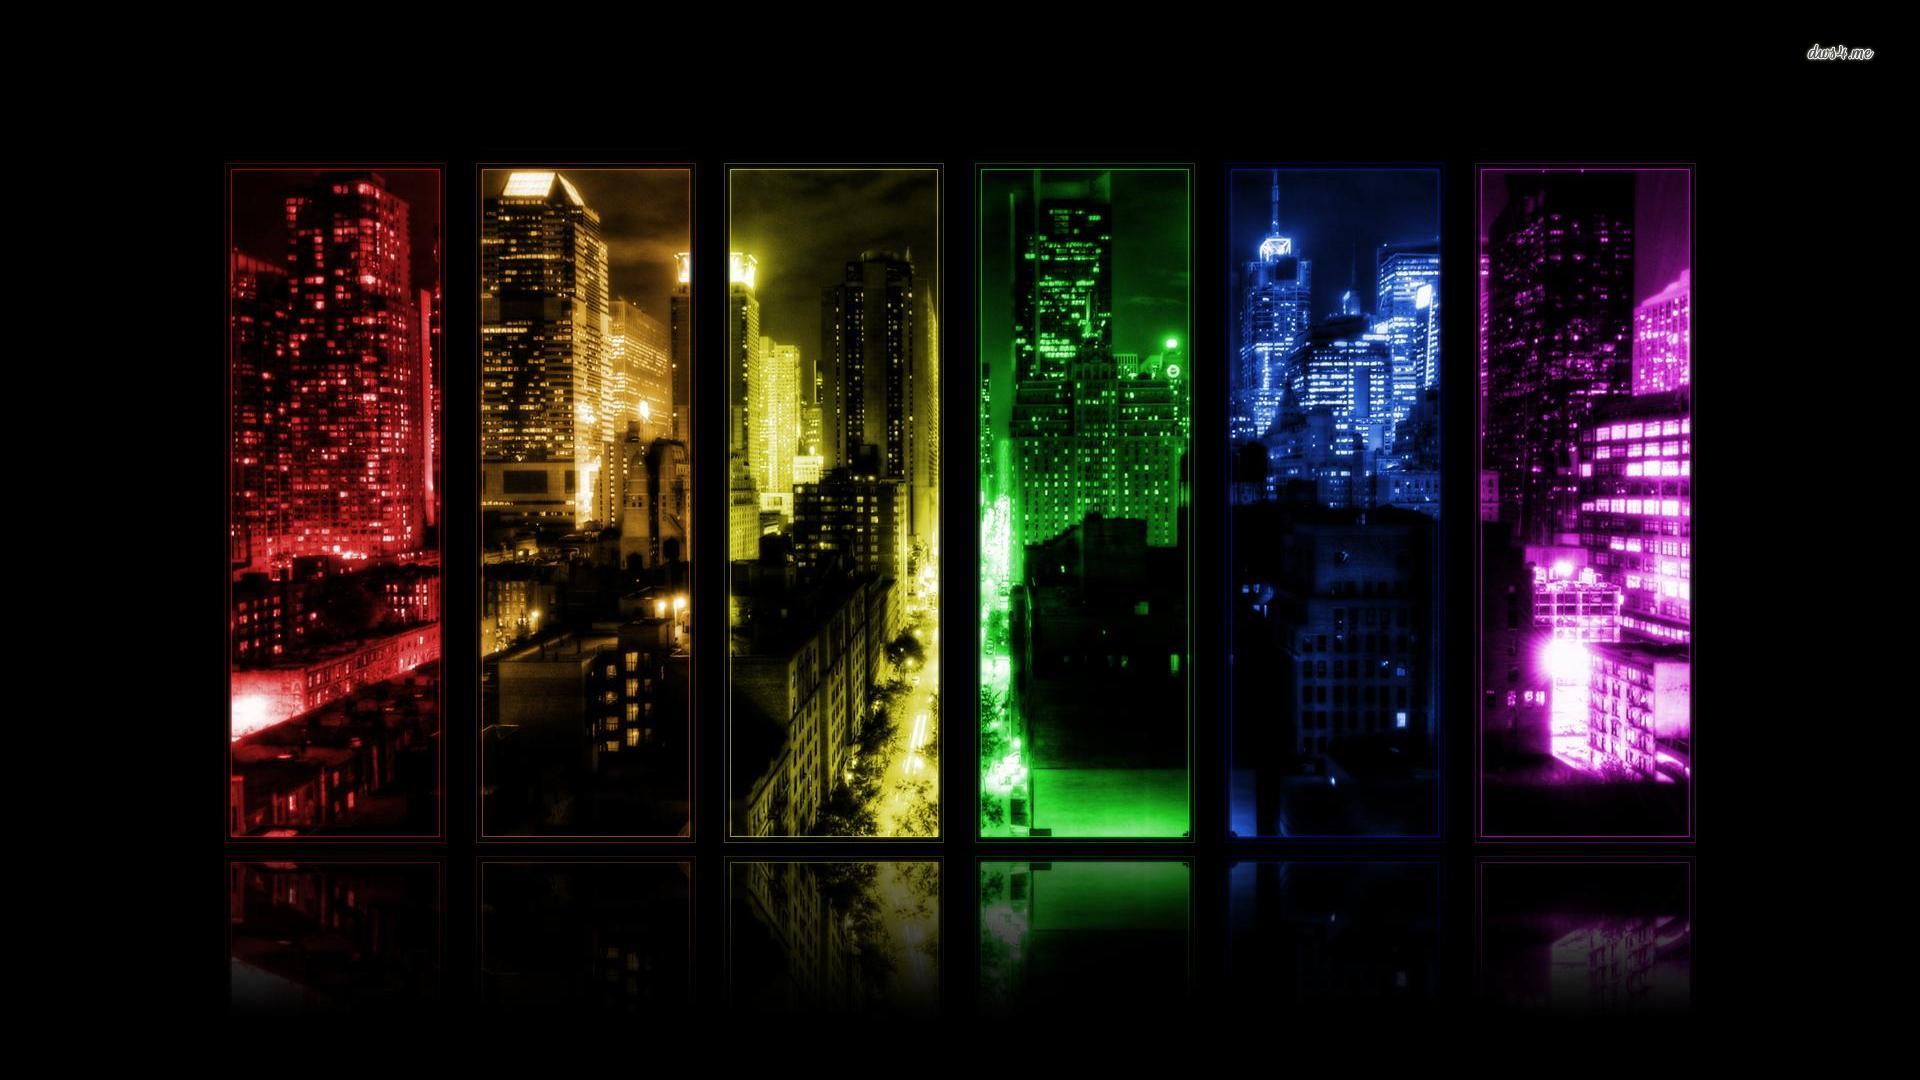 Abstract City Lights Hd Wallpapers in Abstract Imagesci.com City